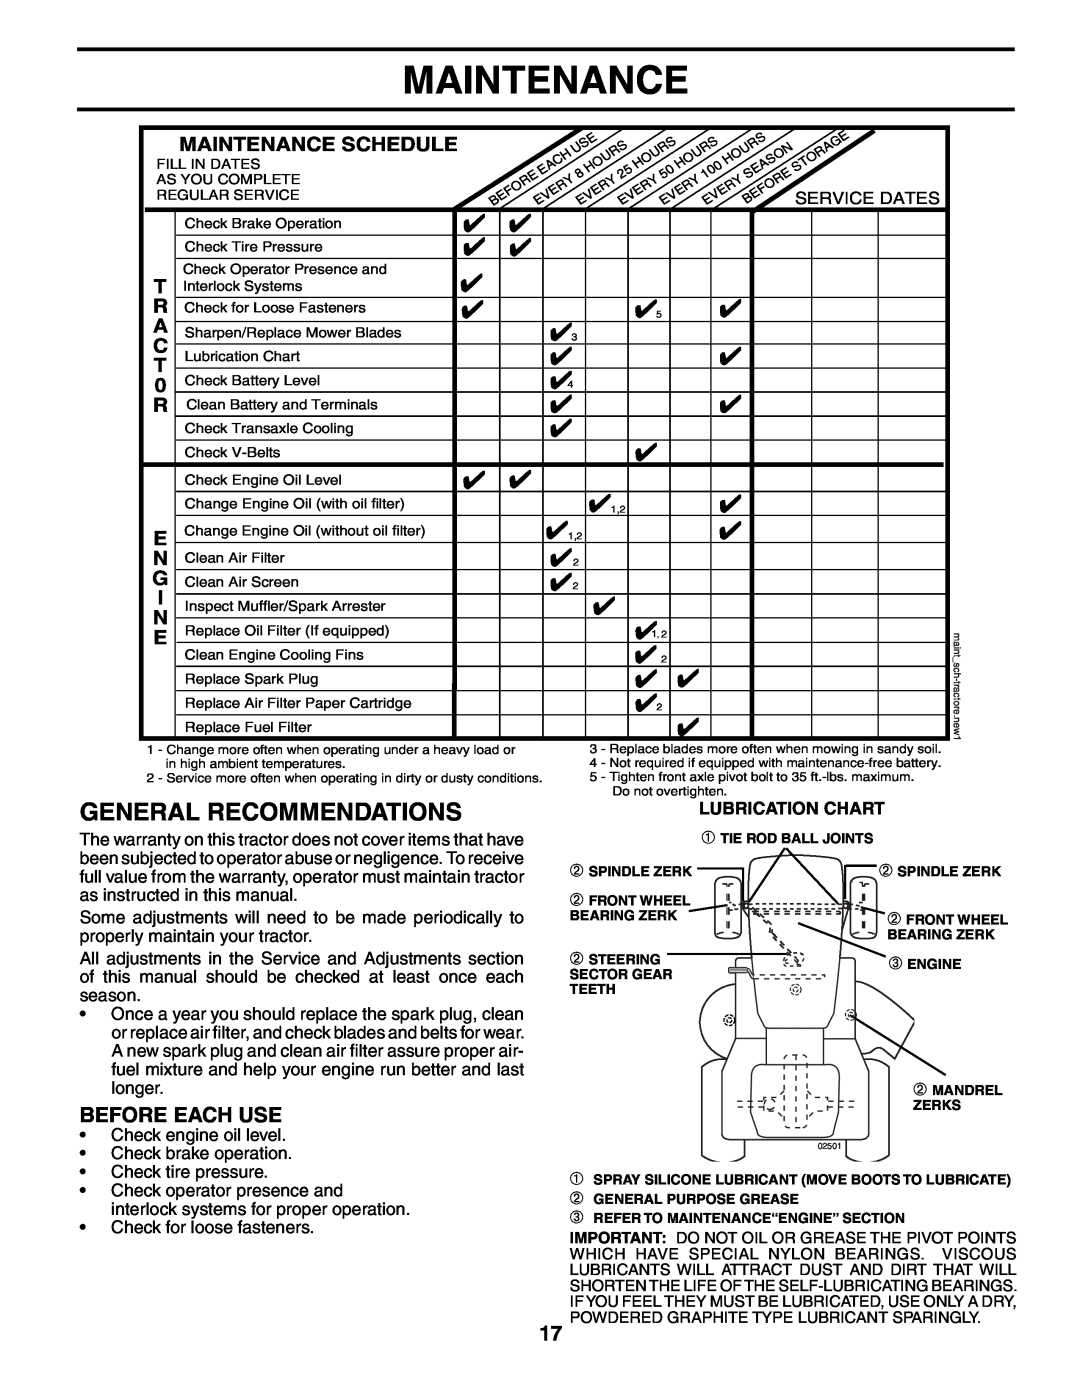 Husqvarna GTH2548XP owner manual General Recommendations, Before Each Use, Maintenance Schedule 